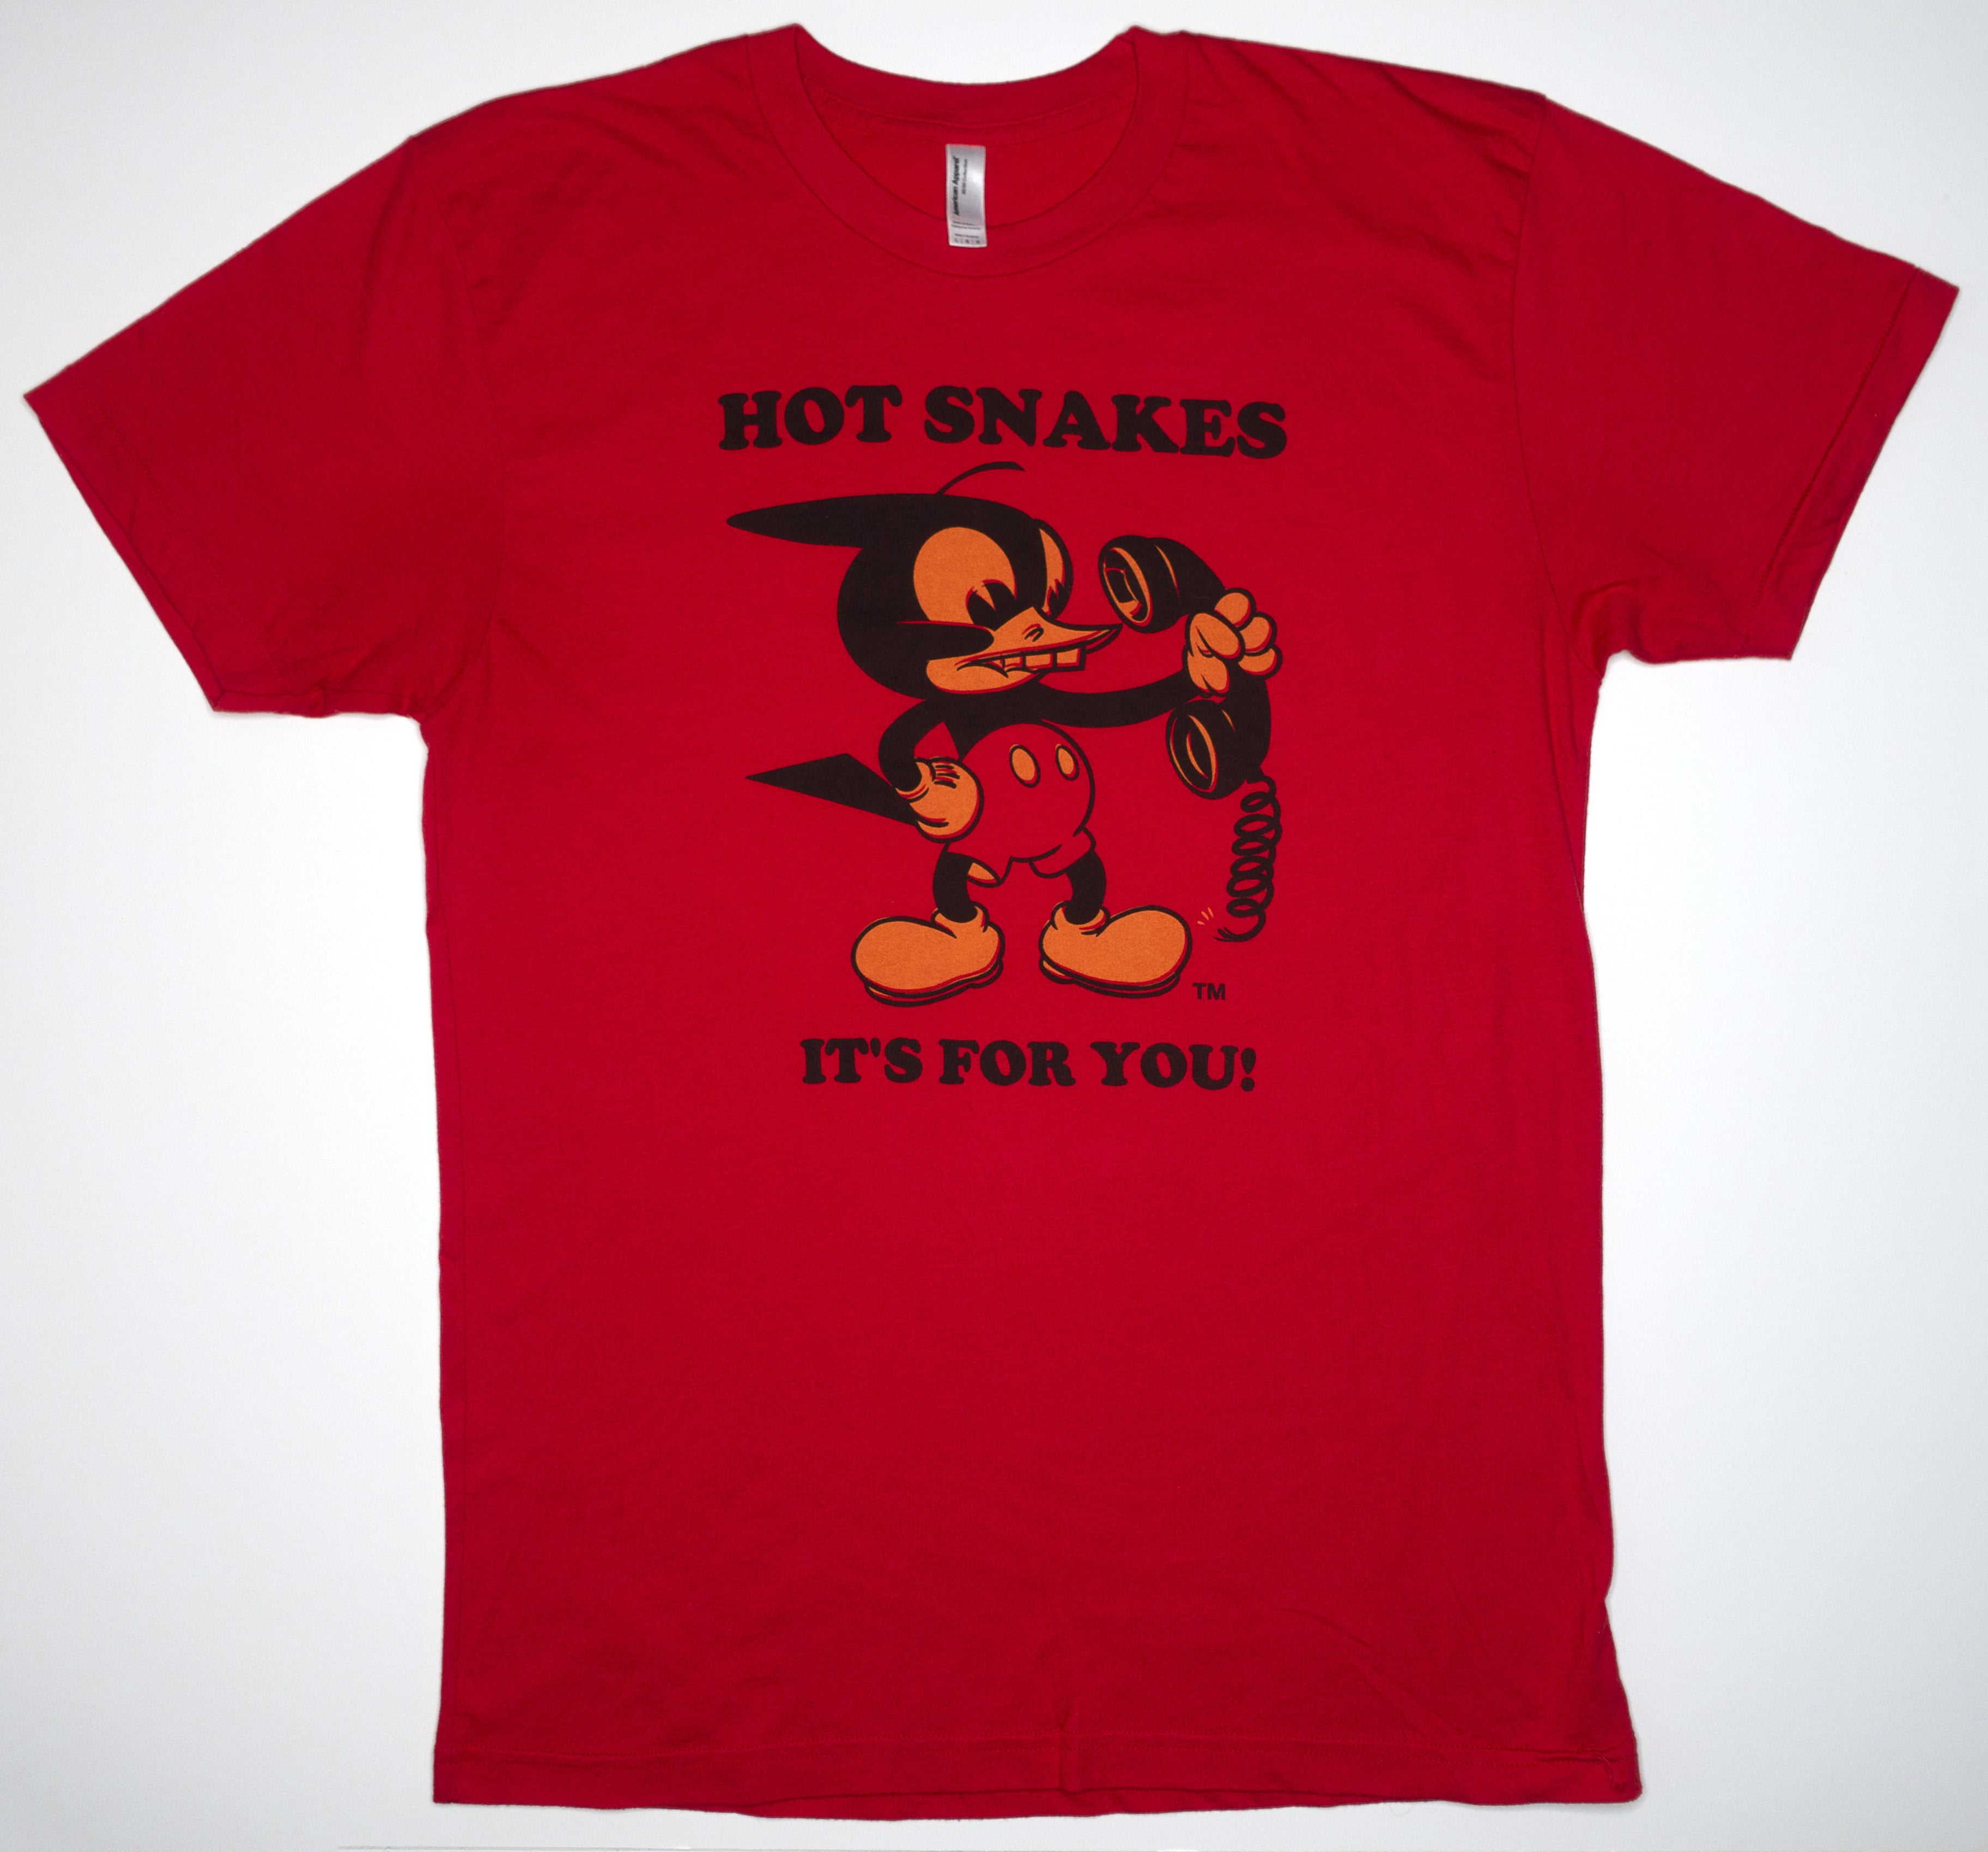 Hot Snakes - Javier / It's For You! Tour Shirt Size Large (Red)